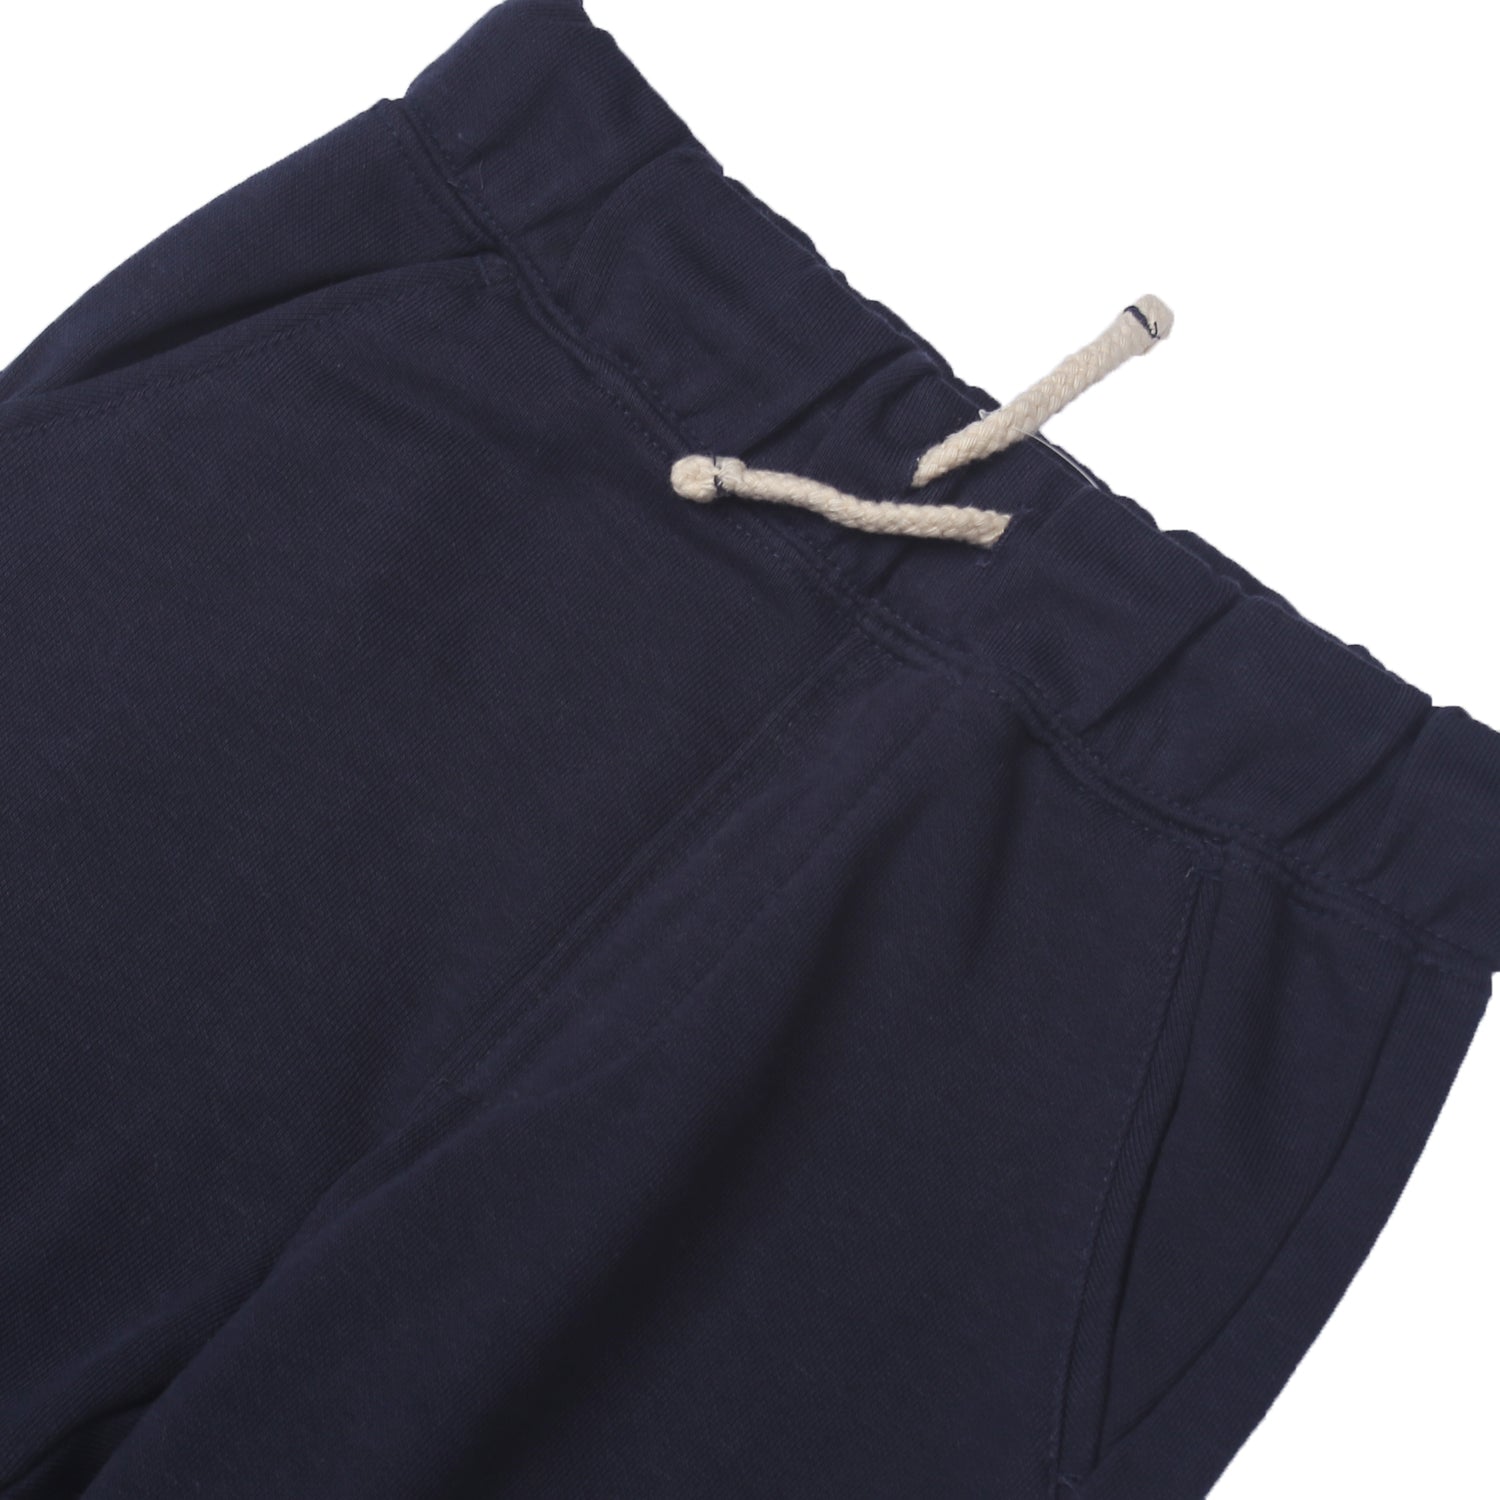 NEW NAVY BLUE DOUBLE POCKET SCWR TROUSER PANTS FOR BOYS